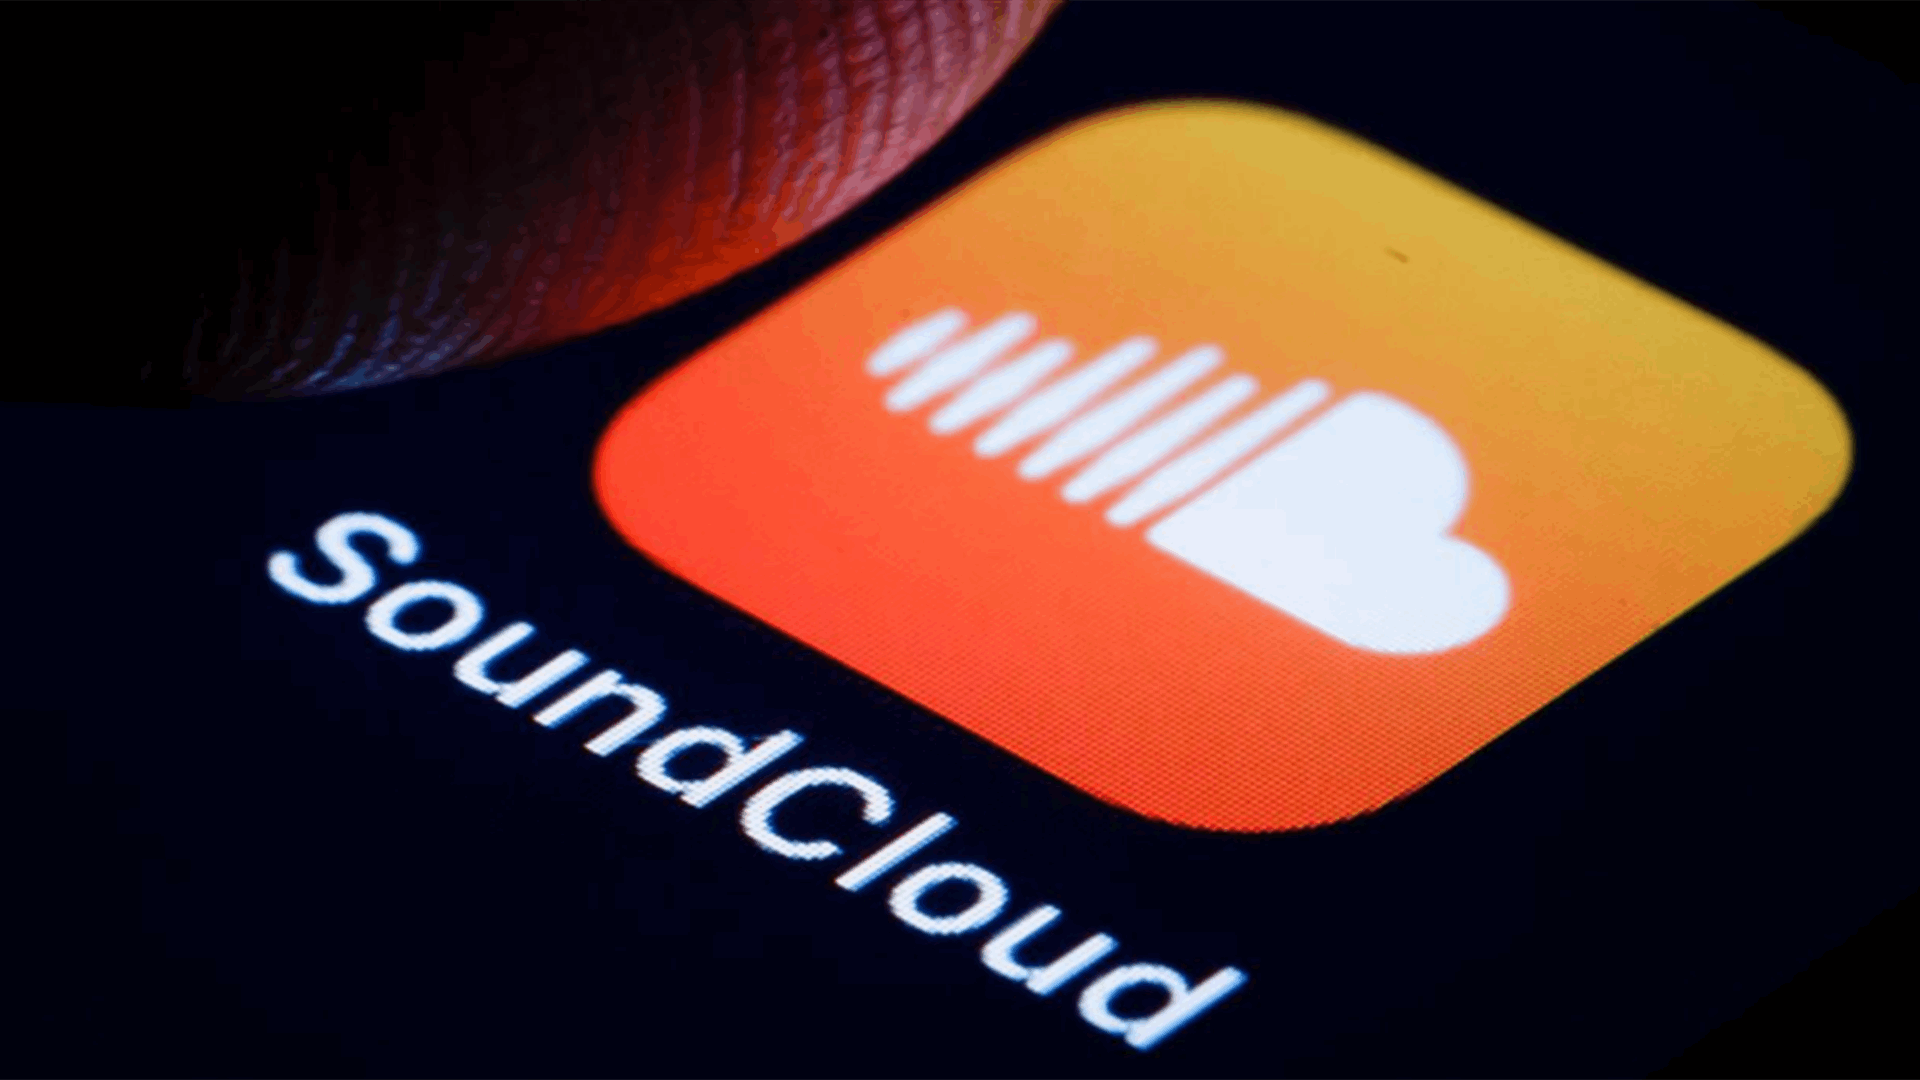 SoundCloud lays off 8 percent of staff as it aims to reach profitability this year